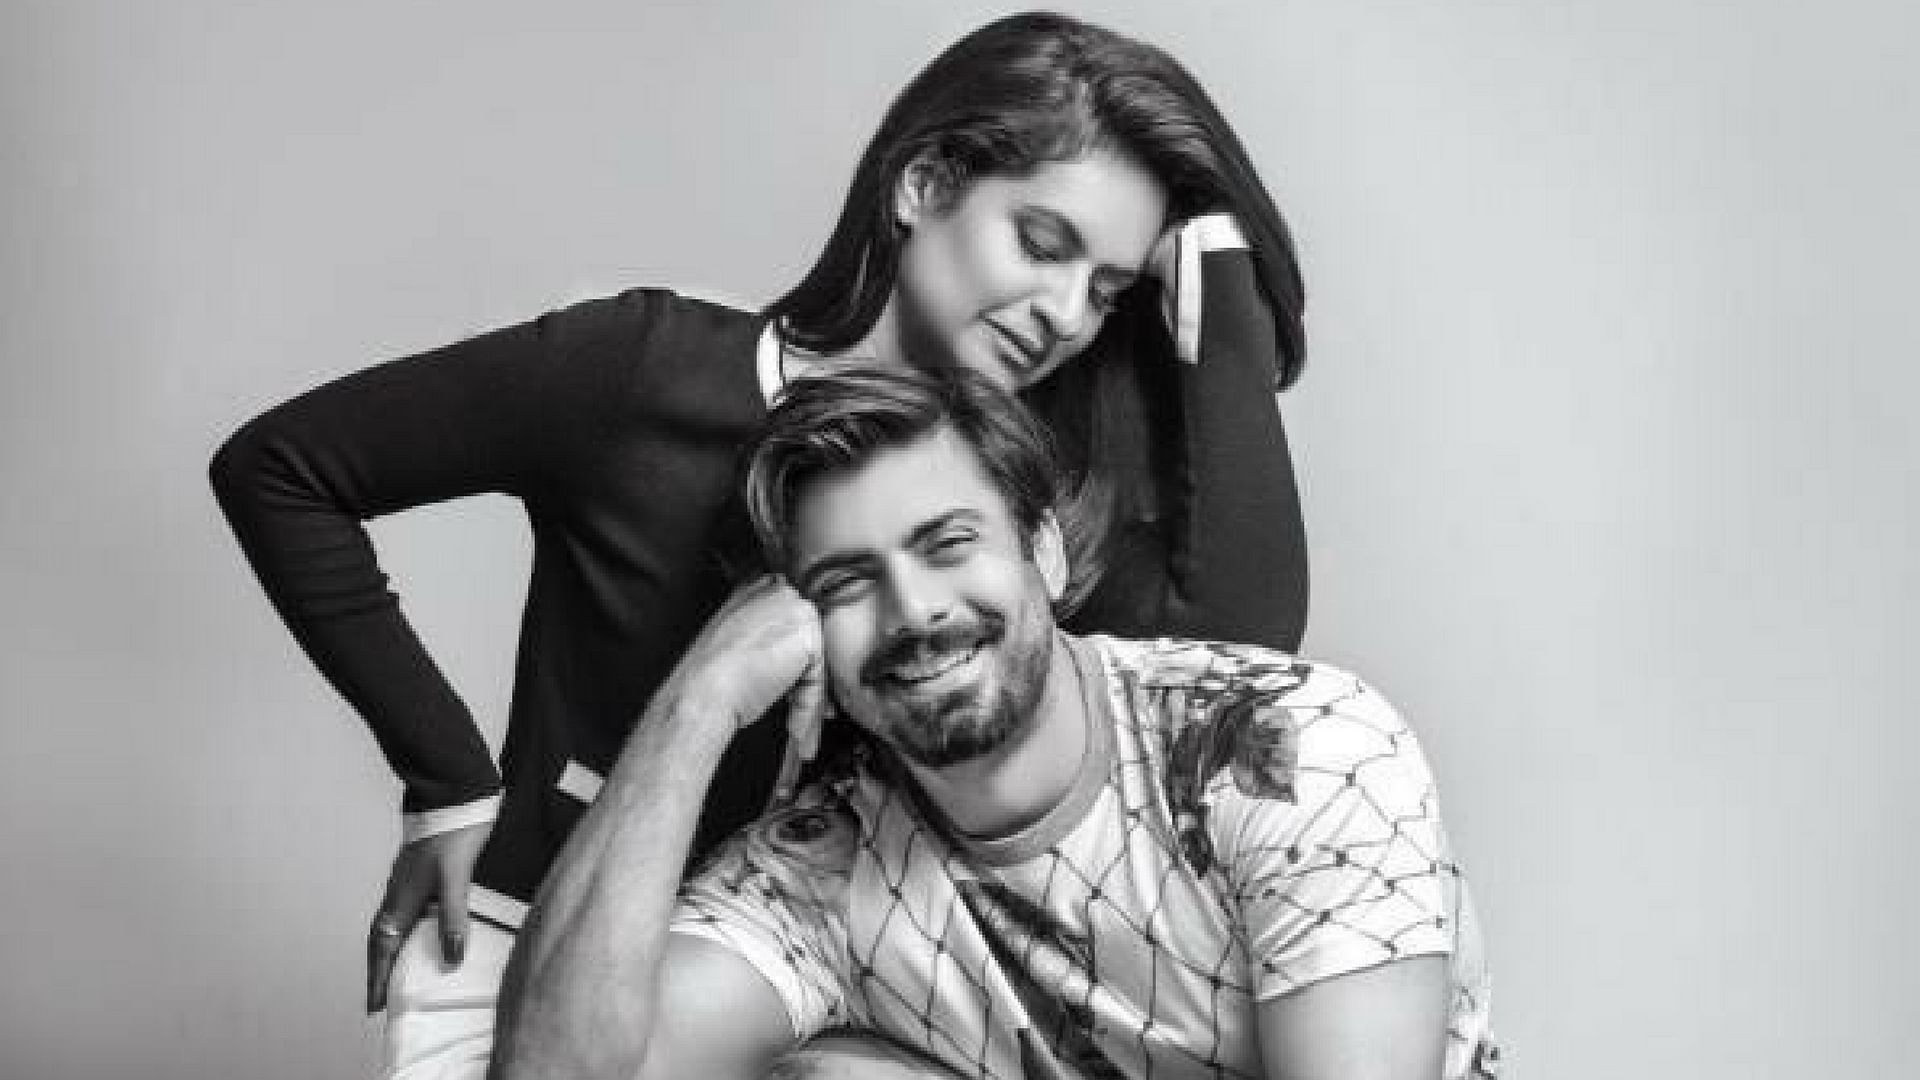 Fawad Khan and wife Sadaf pose for a fashion glossy. (Photo courtesy: <a href="https://twitter.com/mehreezaidi/status/859382373971968000">Twitter/RCB</a>)